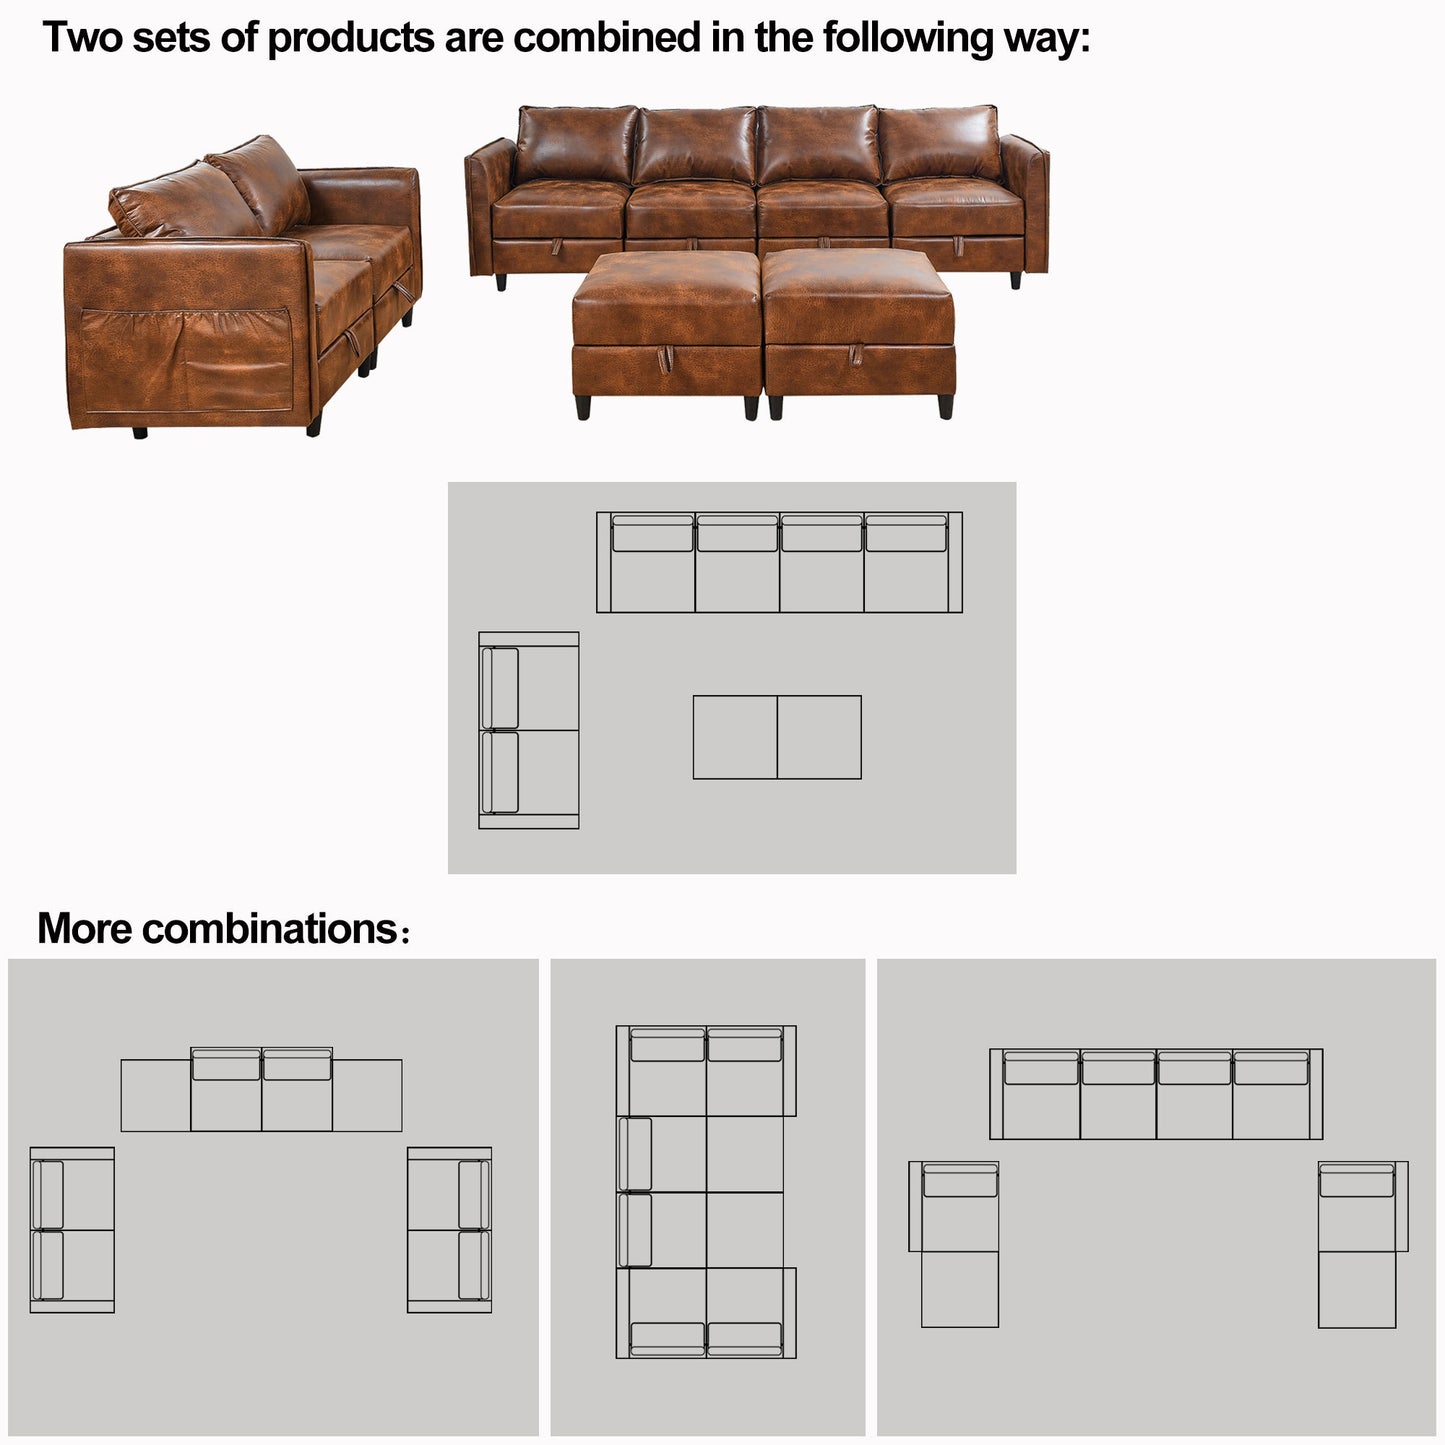 3-Piece Combination Convertible Brown Sleeper Sofa Set with Storage